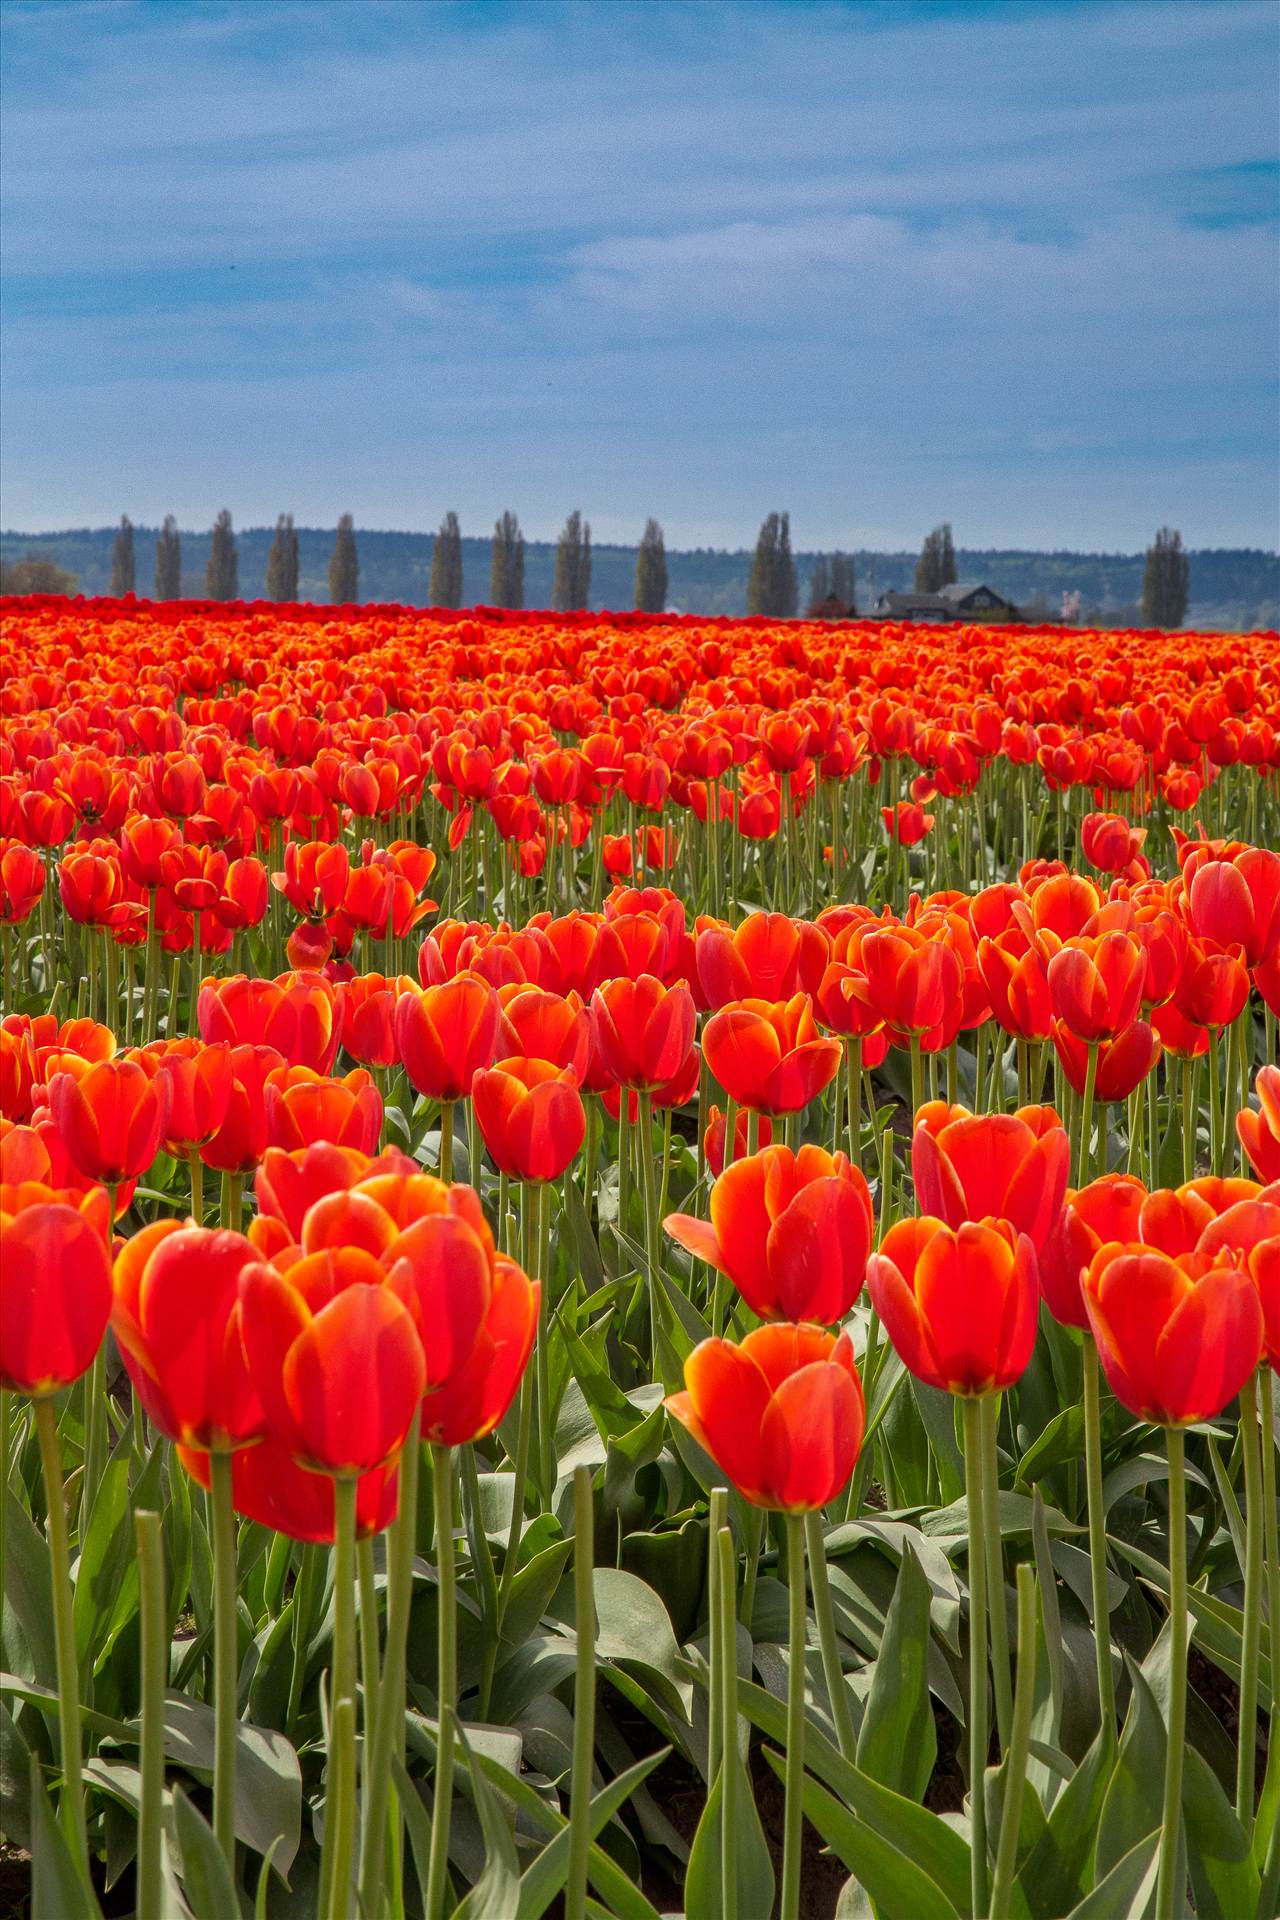 Standing Tall From the 2012 Skagit County Tulip Festival. by Scott Smith Photos